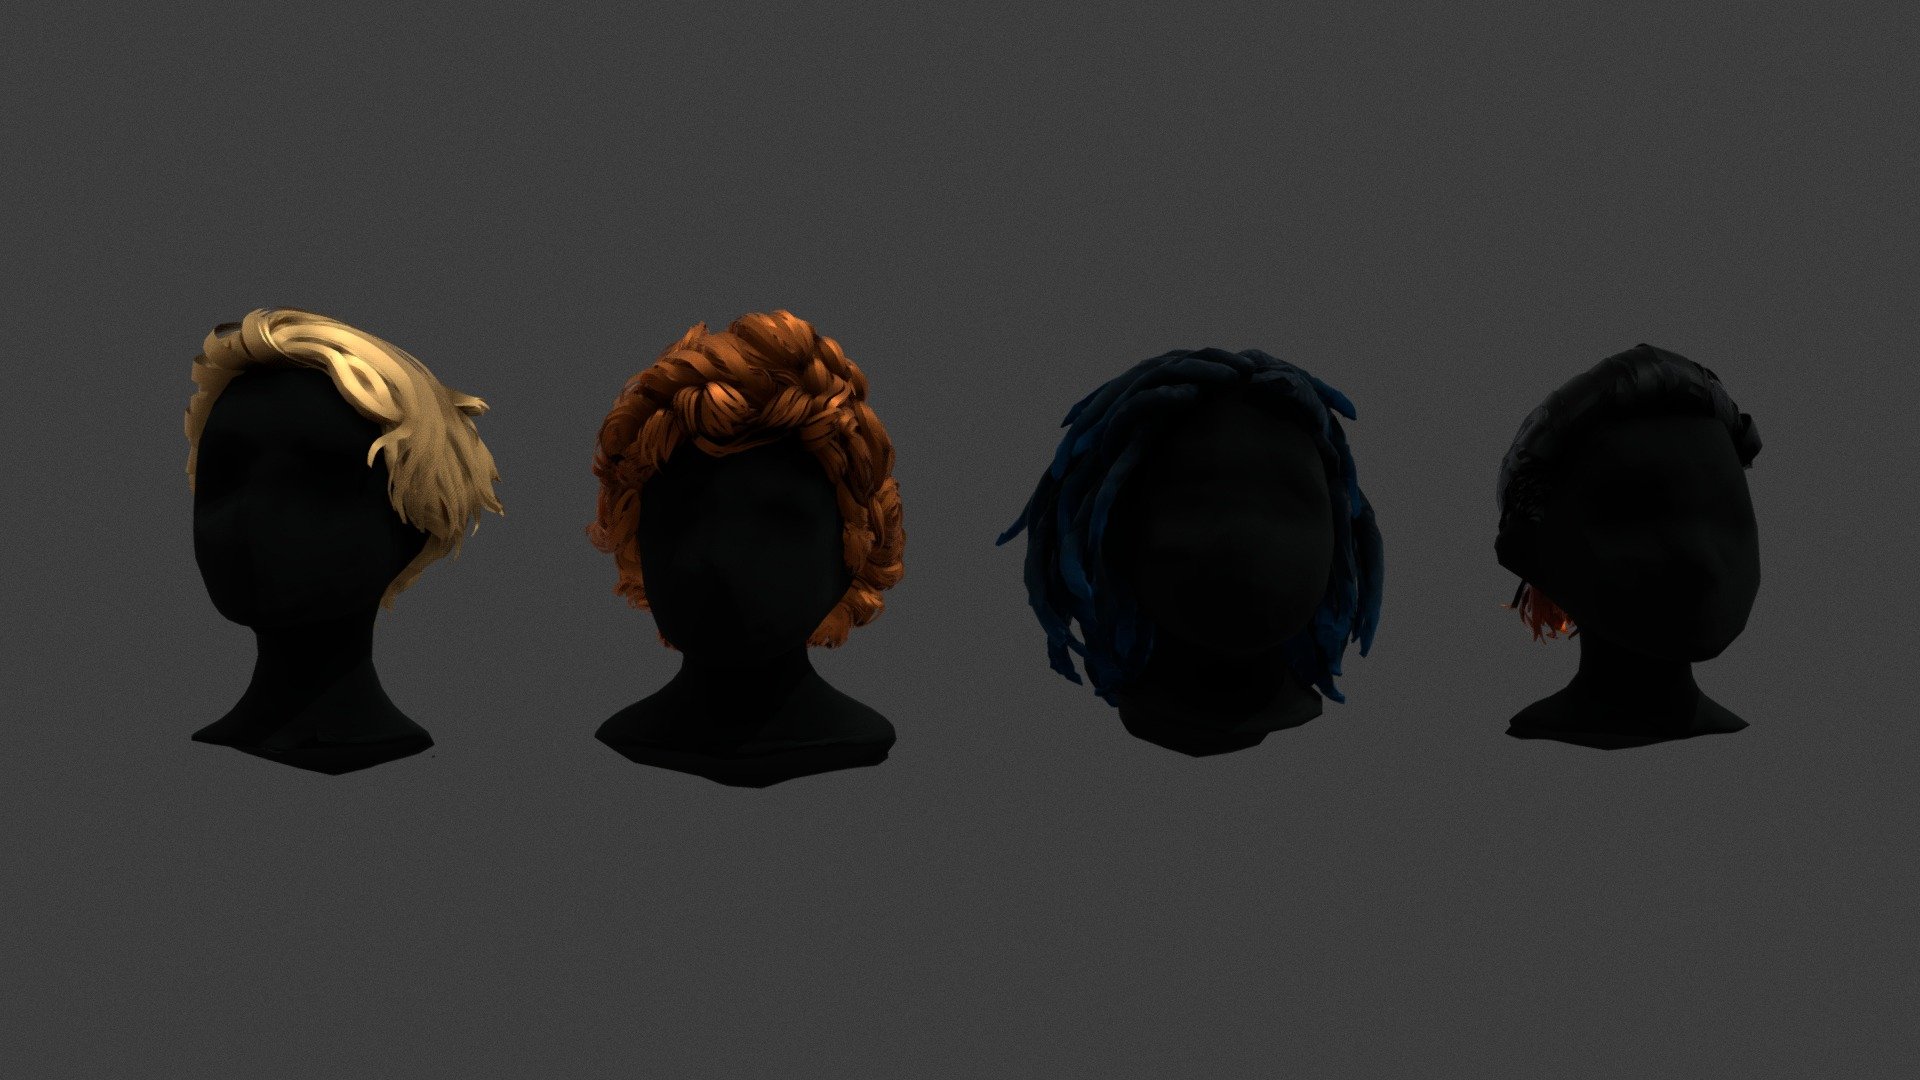 4 short low poly cartoon style hairstyles ready for video games. Two of the models have no textures but all the hairstyles have UVs 3d model